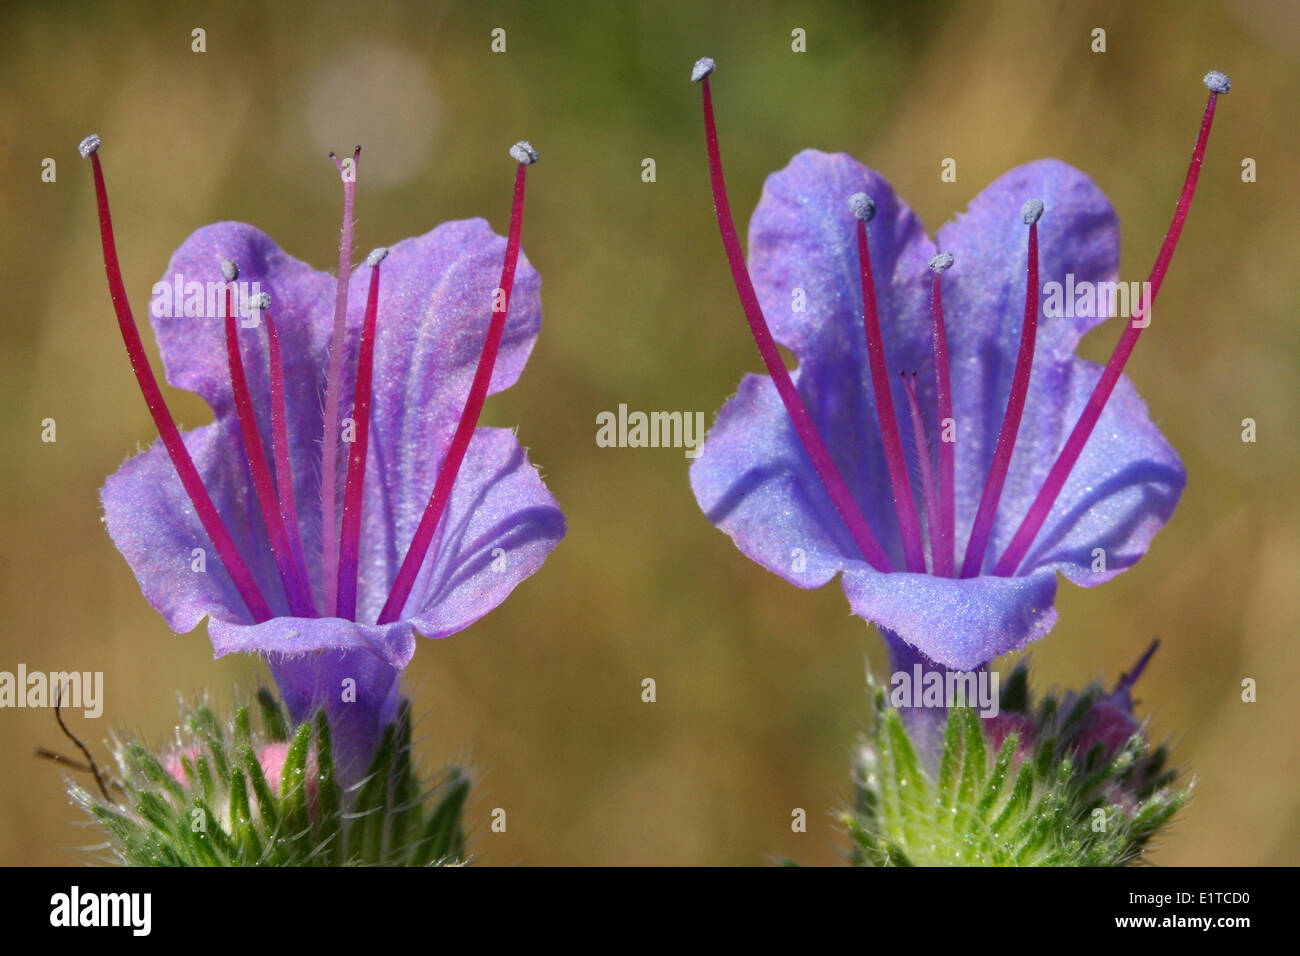 close-up of two flowers of the Viper's Bugloss with stamens and style Stock Photo